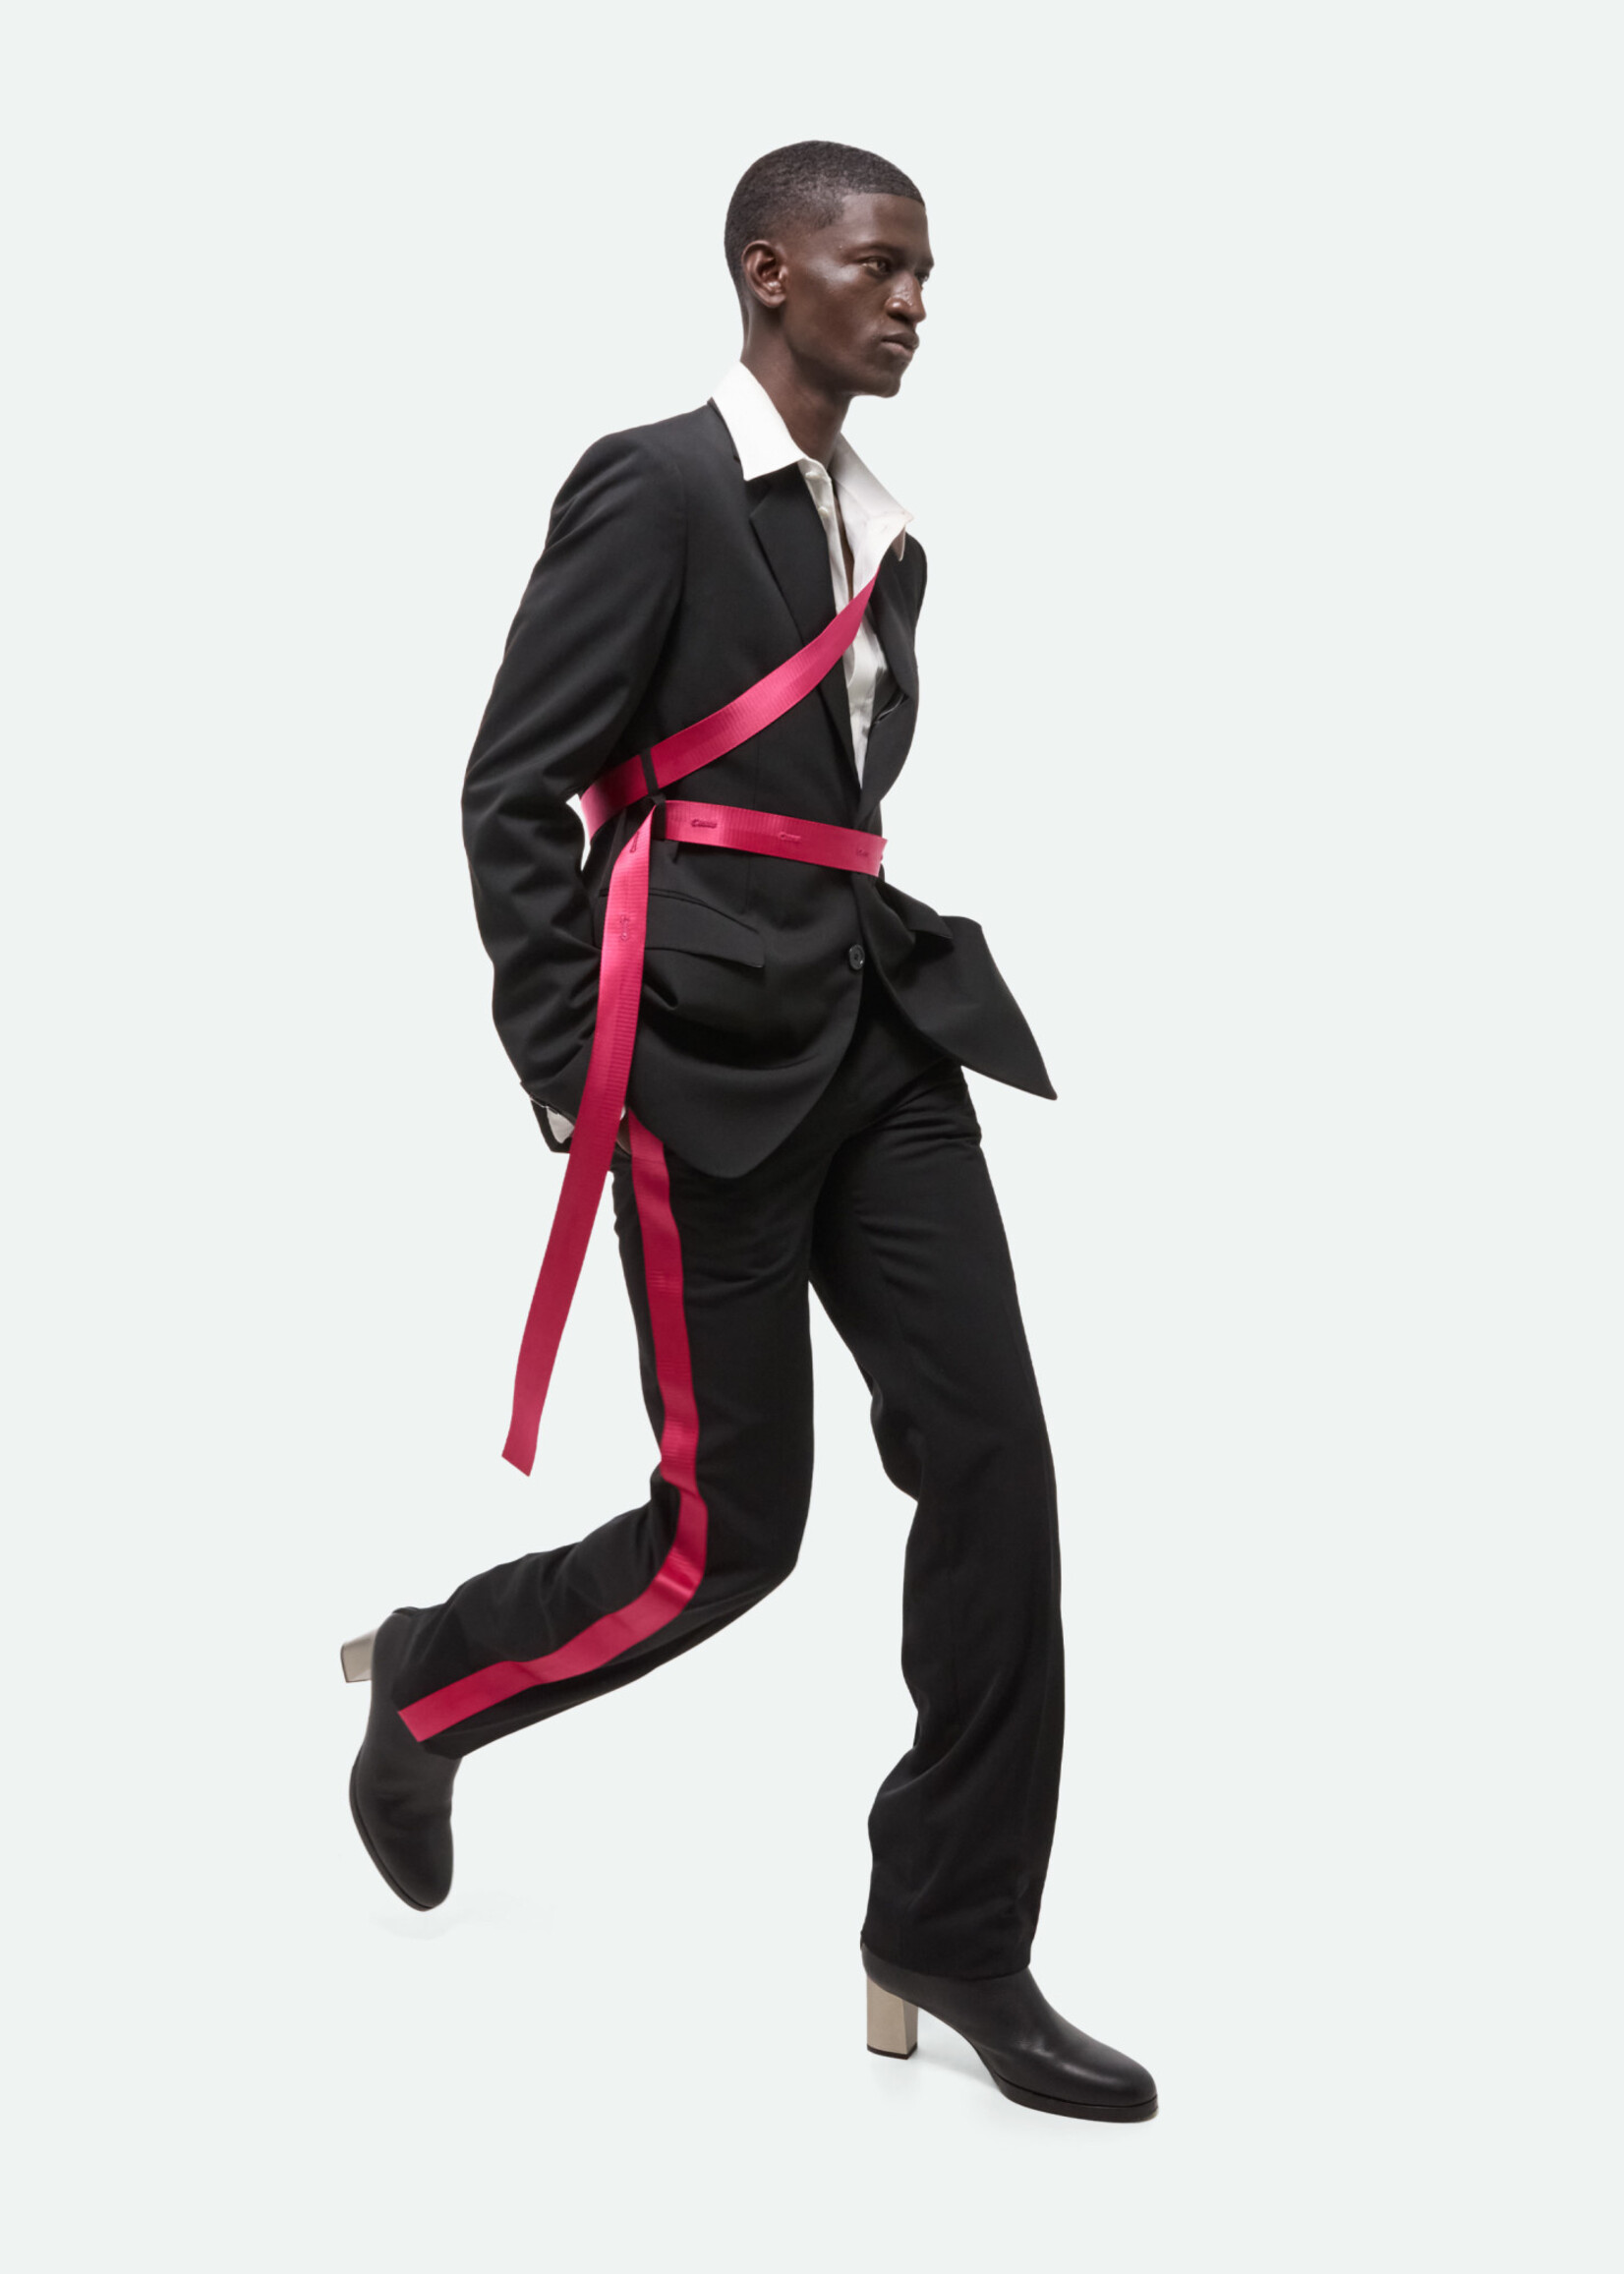 HELMUT LANG BY PETER DO Seatbelt Blazer in Black and Fuchsia